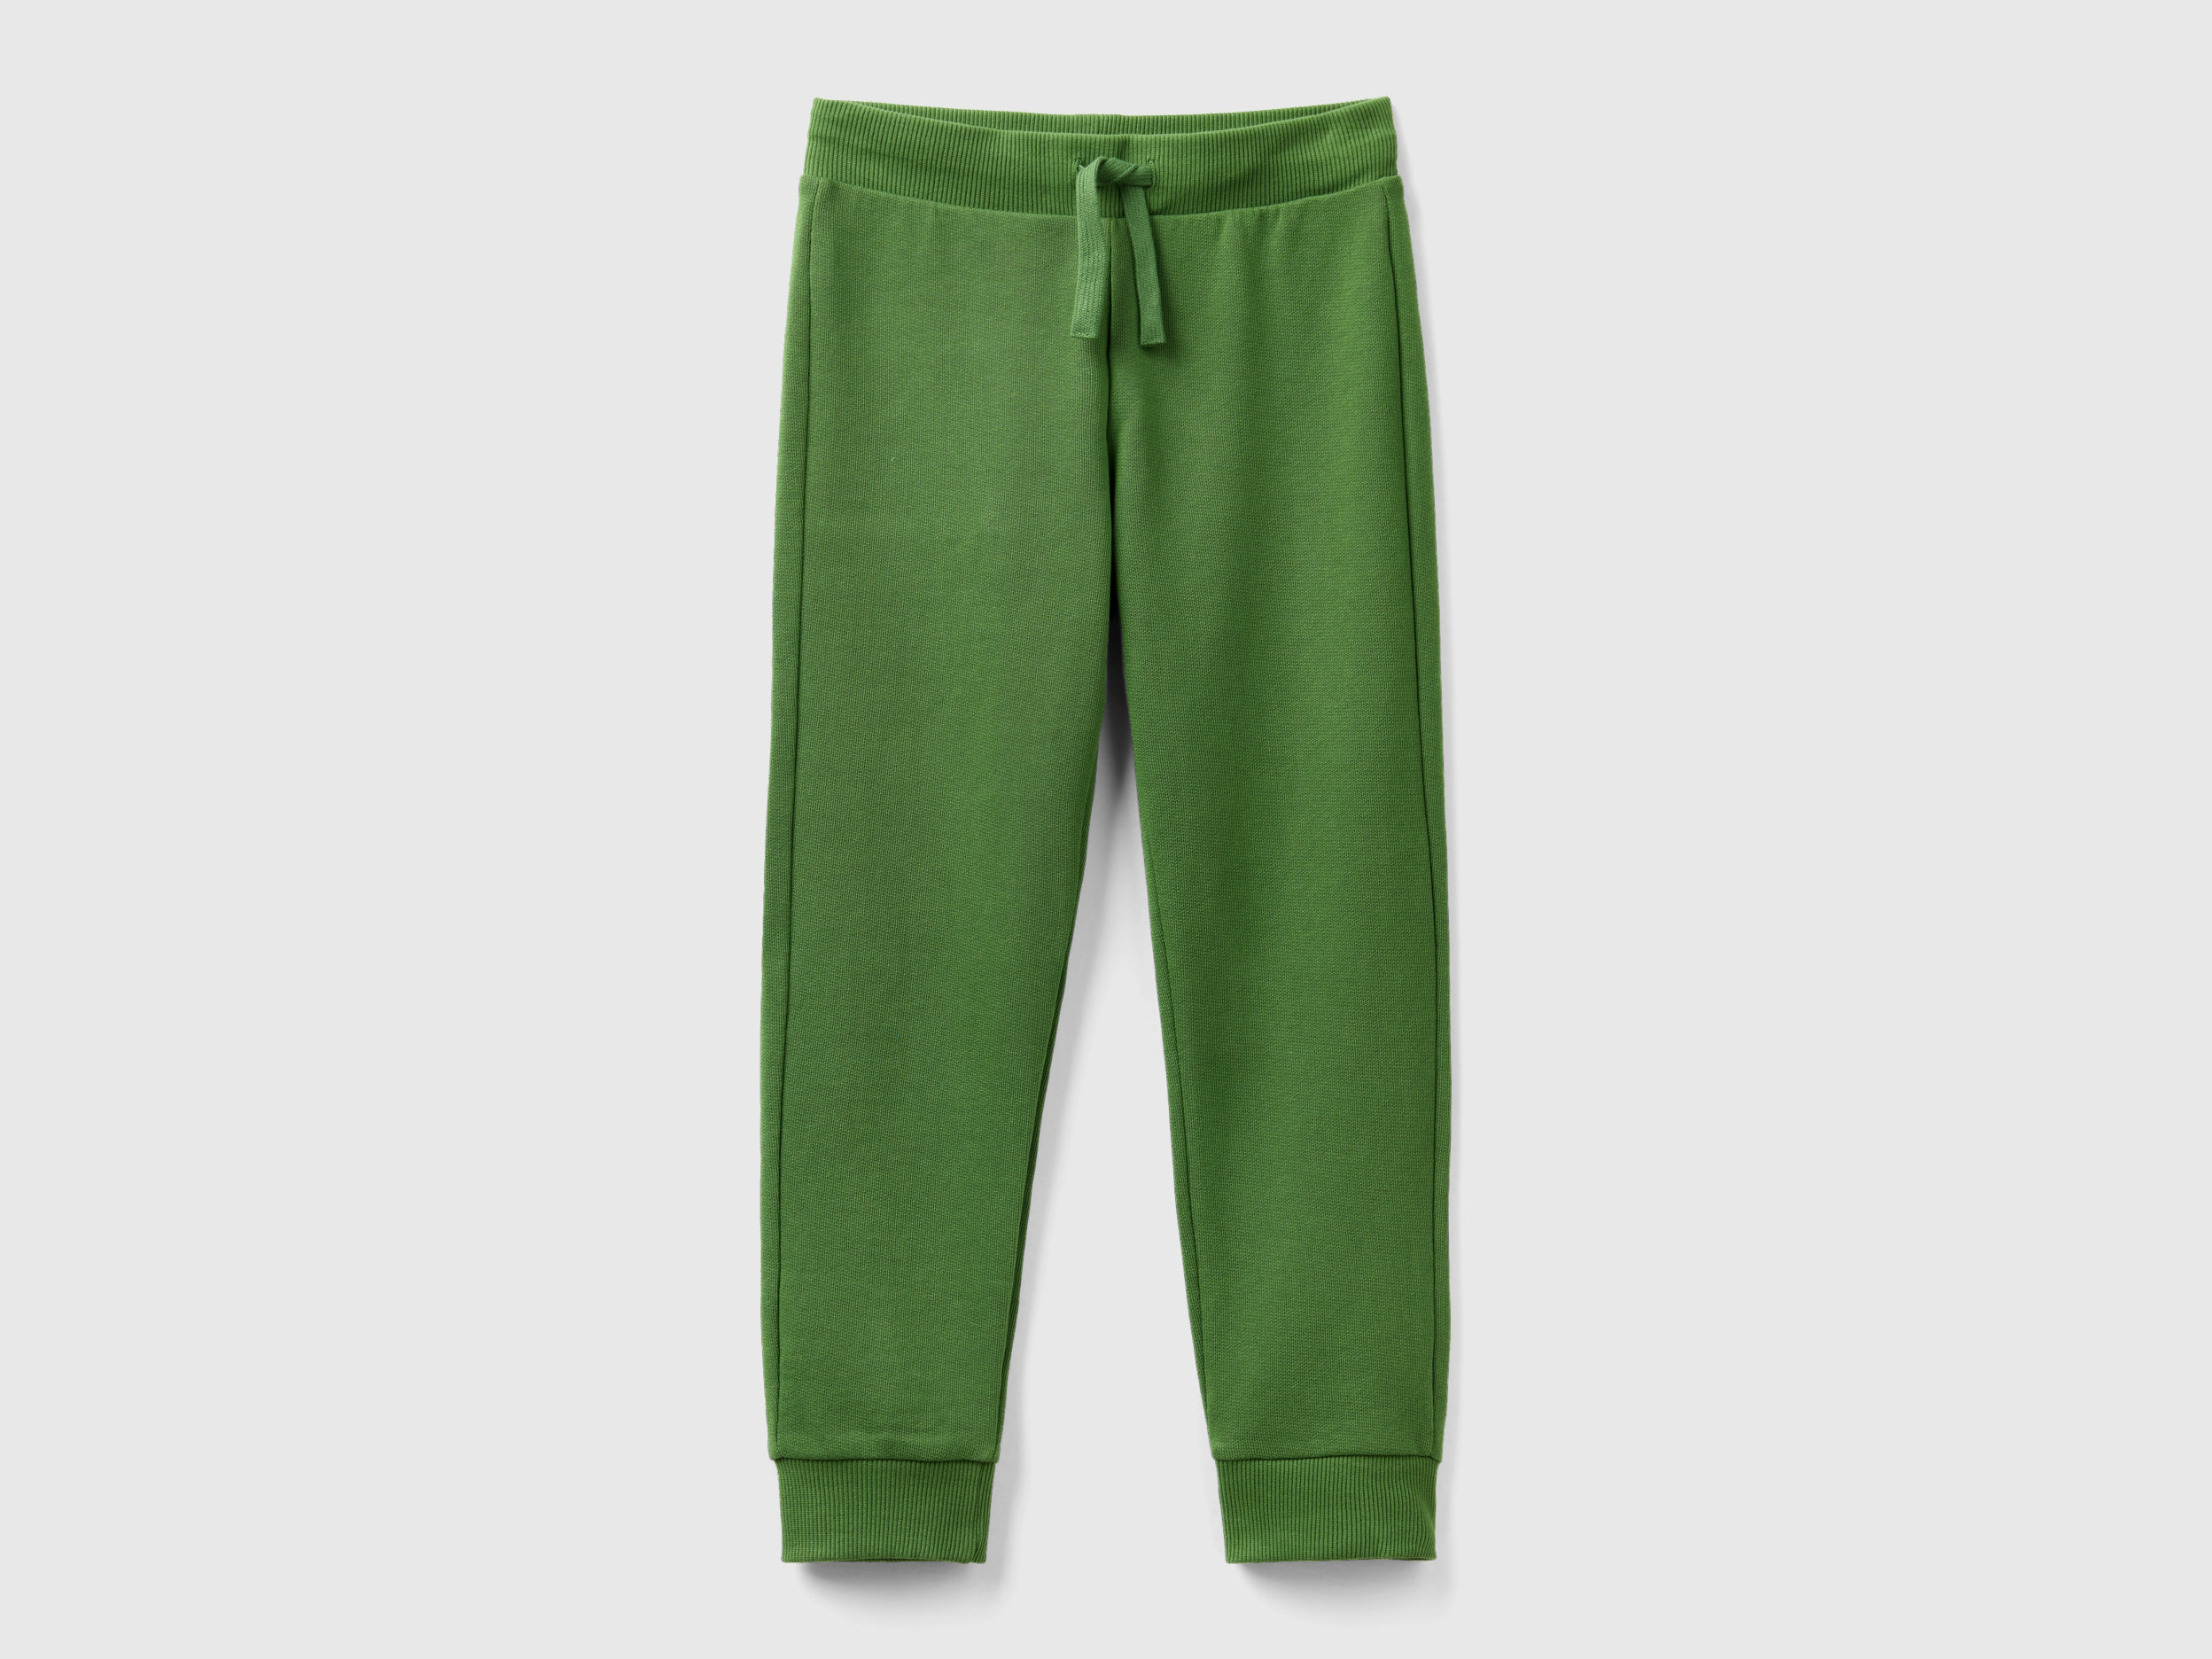 Benetton, Sporty Trousers With Drawstring, size 2XL, Military Green, Kids